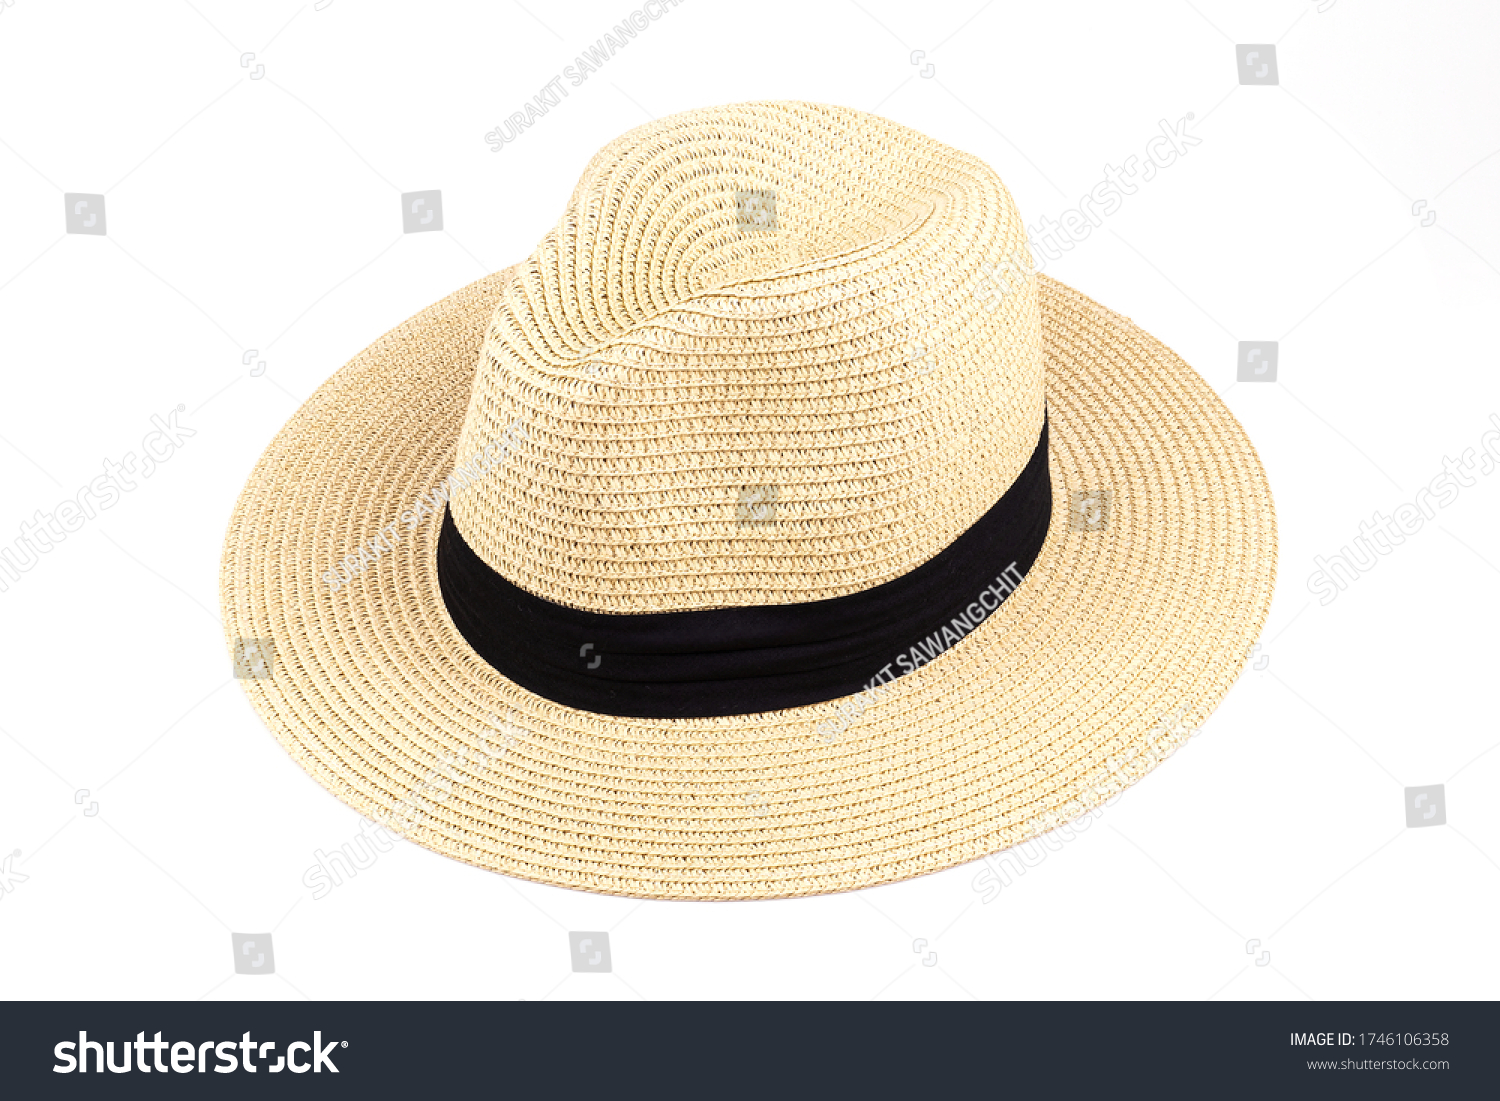 Panama hat style, Straw hat with black ribbon isolated on white background, Straw hat for woman
 #1746106358